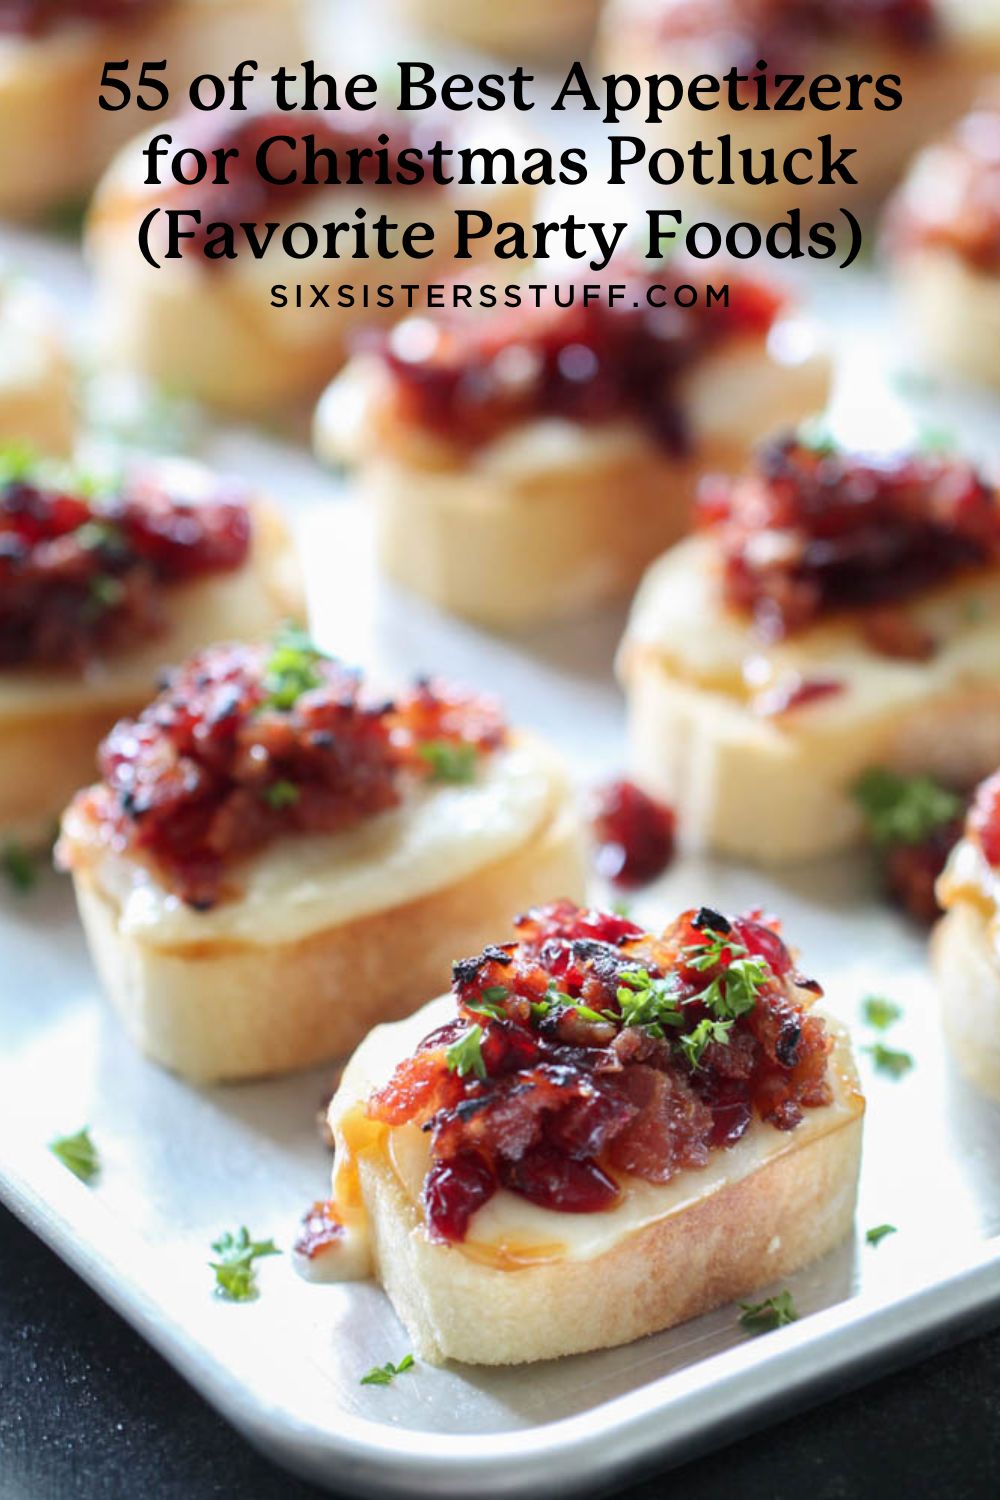 55 of the Best Appetizers for Christmas Potluck (Favorite Party Foods)